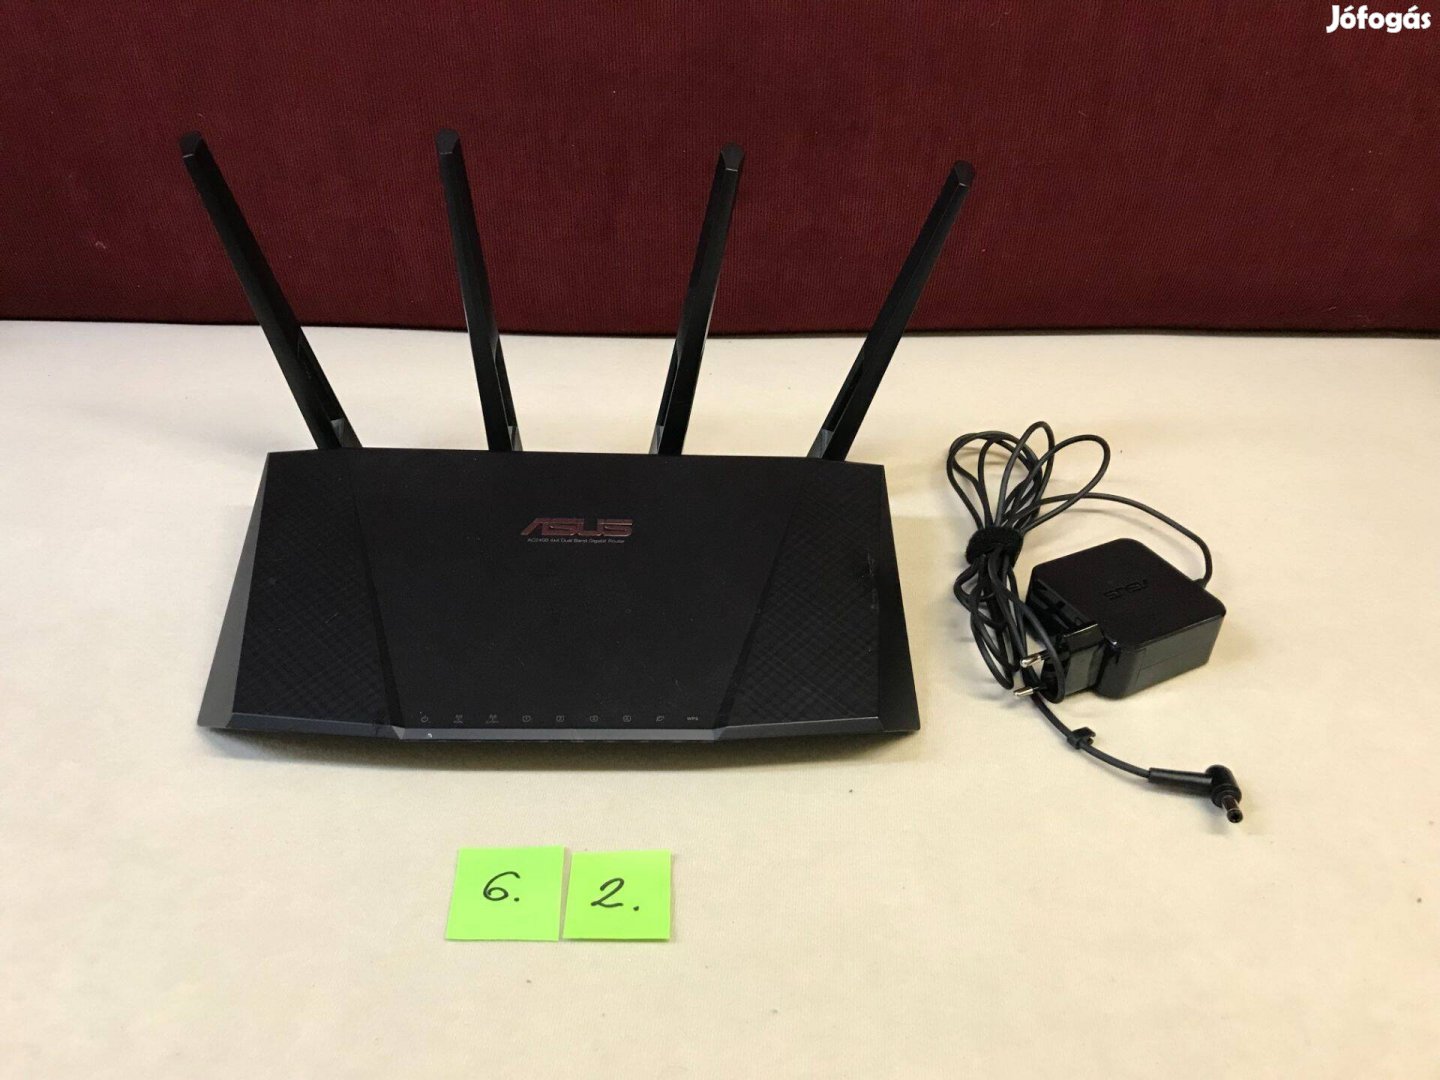 Asus RT-AC2400 Router